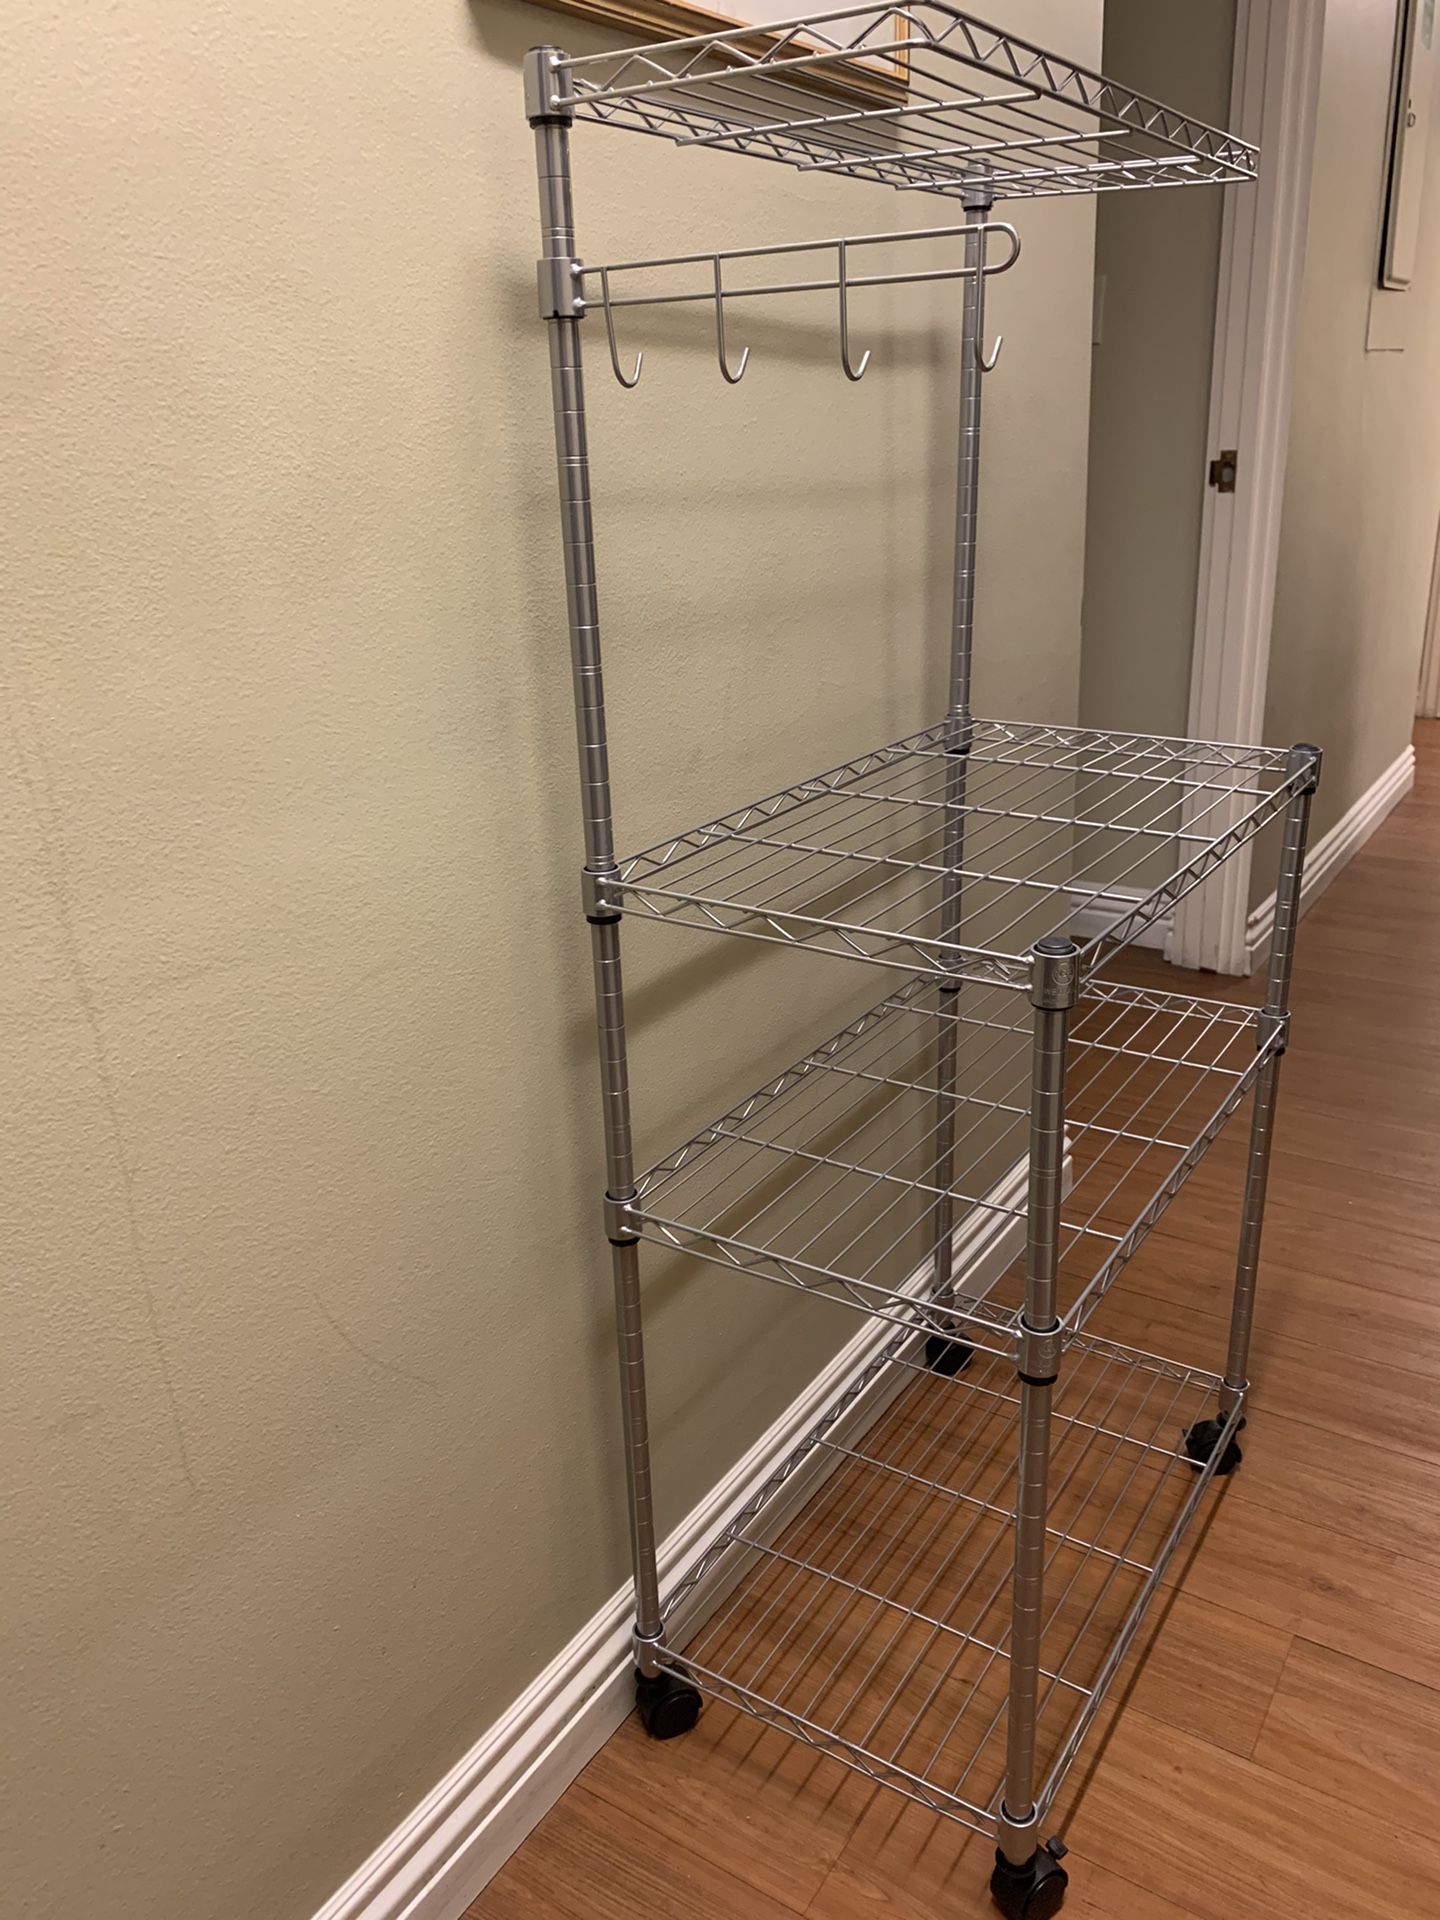 4 Tier Microwave Stand Storage Rack, Kitchen Wire Shelving Microwave Oven Baker’s Rack with Hooks Silver Grey